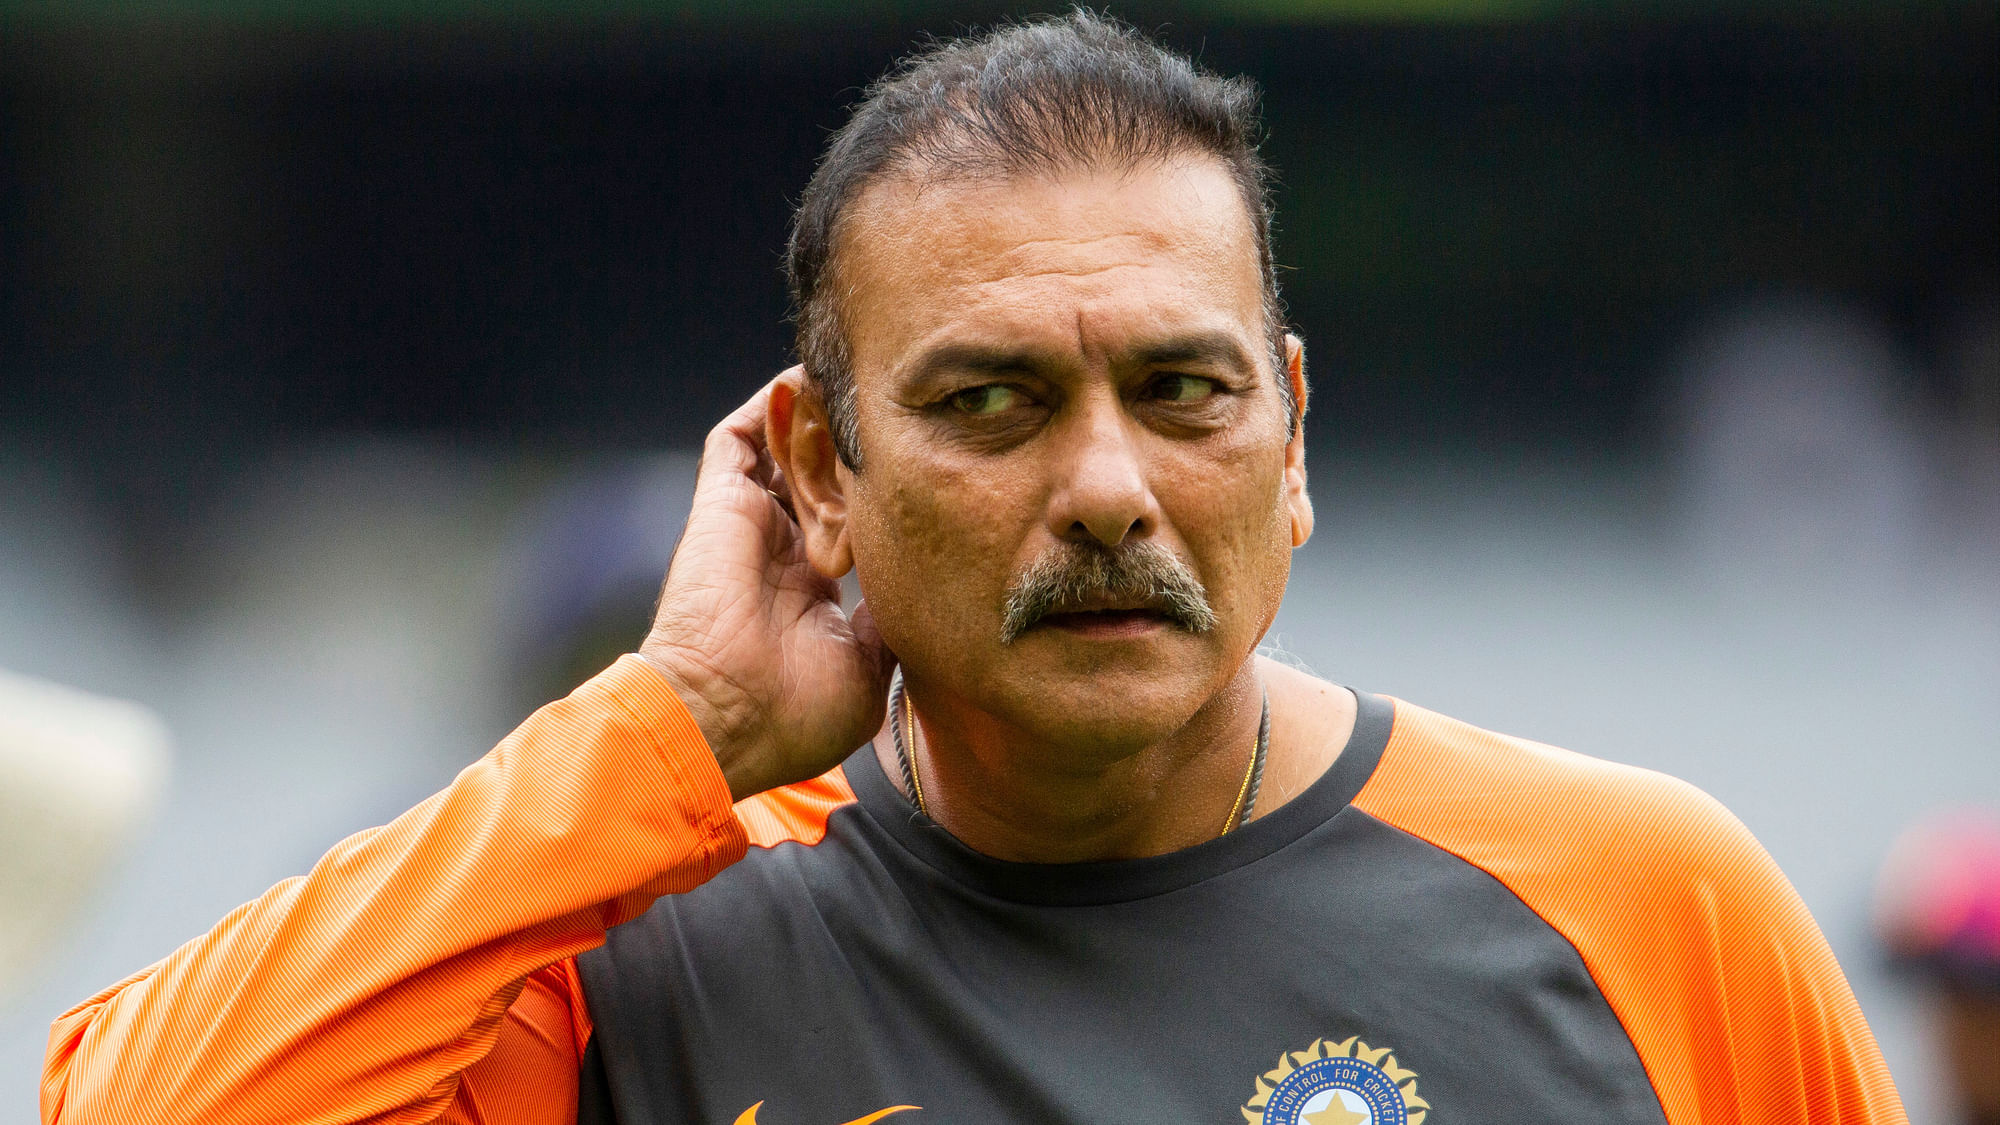 India coach Ravi Shastri has said he would have preferred a 16-member World Cup squad instead of the mandated 15.